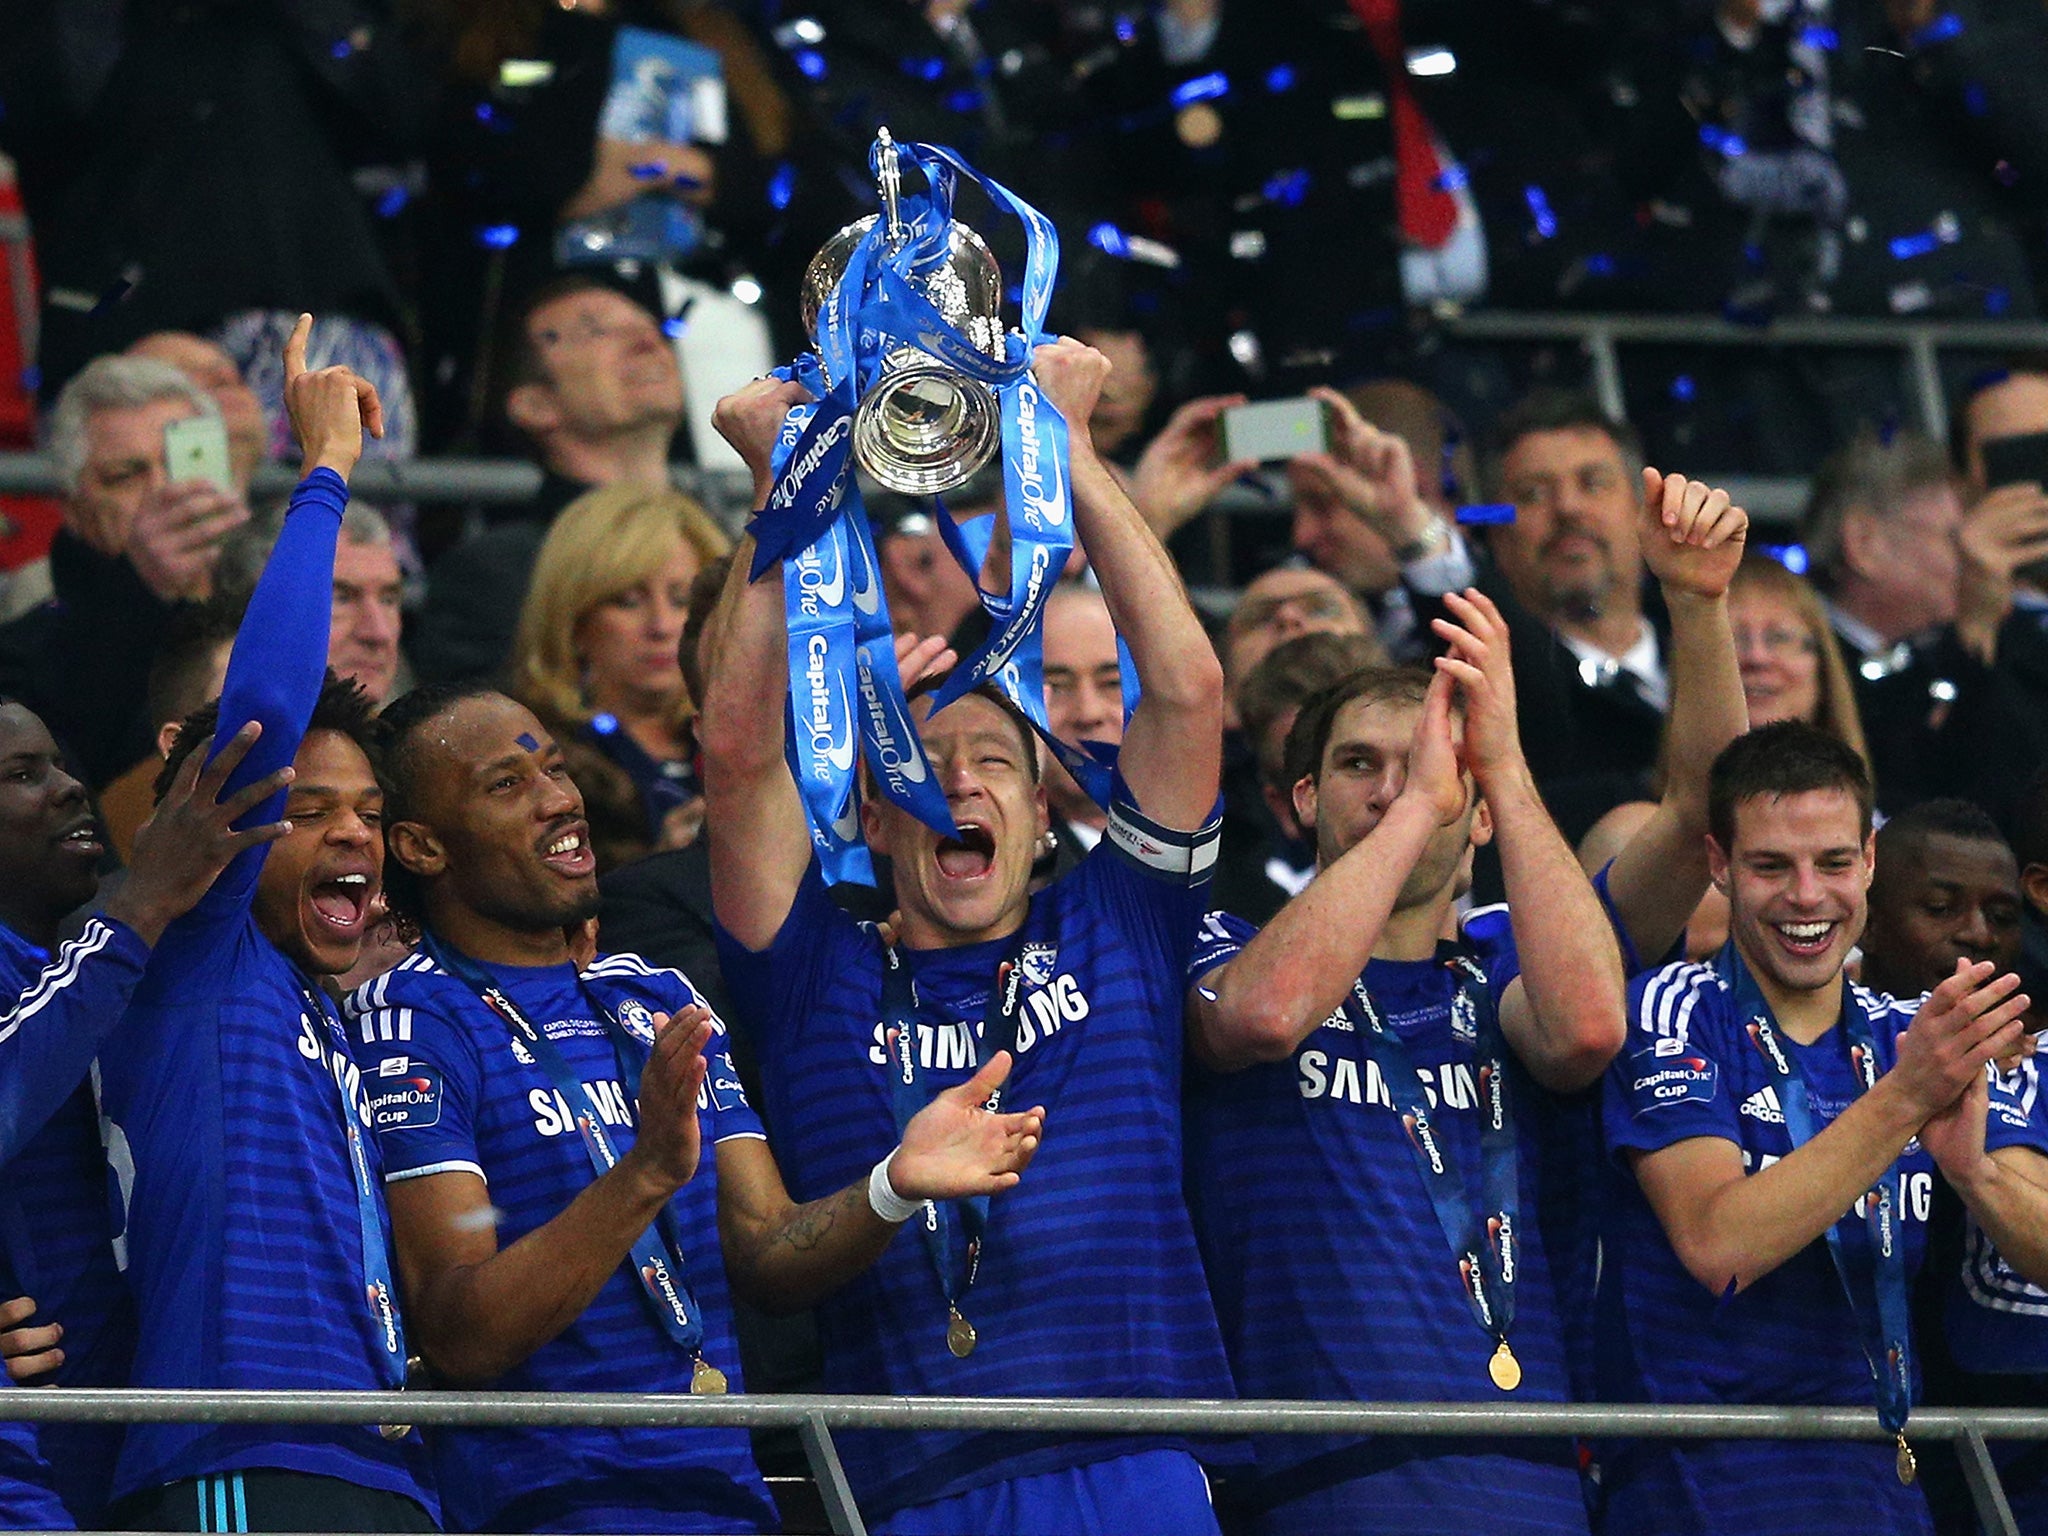 Chelsea will hope to build on their title win with a strong pre-season